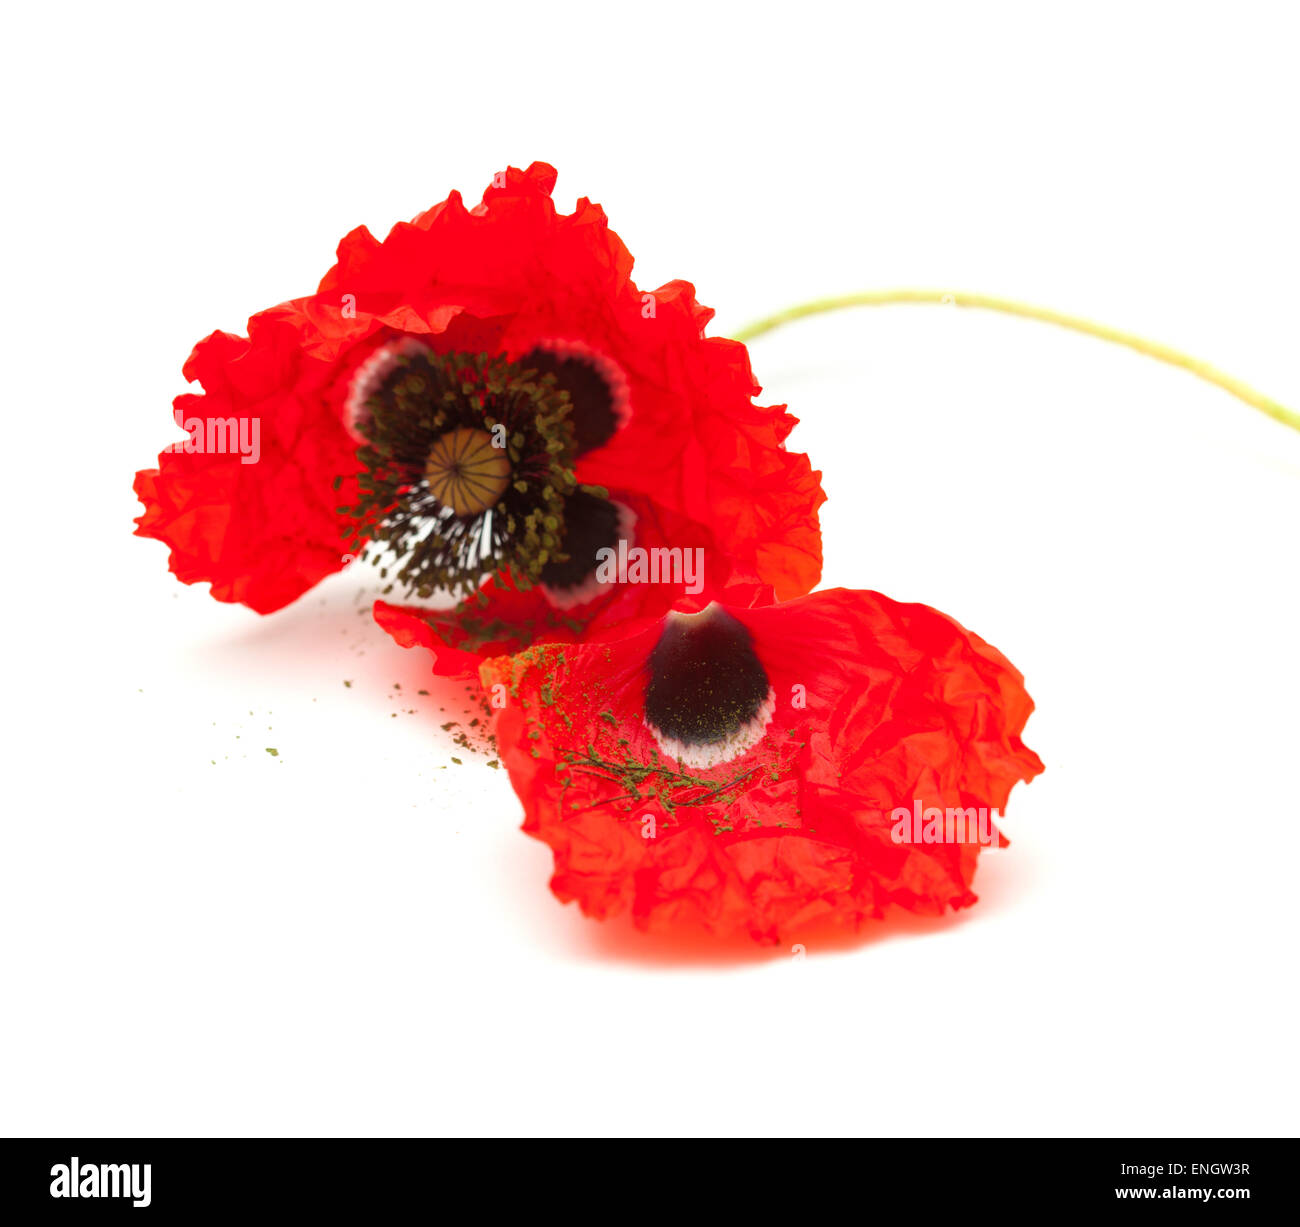 wilting red poppy isolated on white background, focus on the loose petal Stock Photo